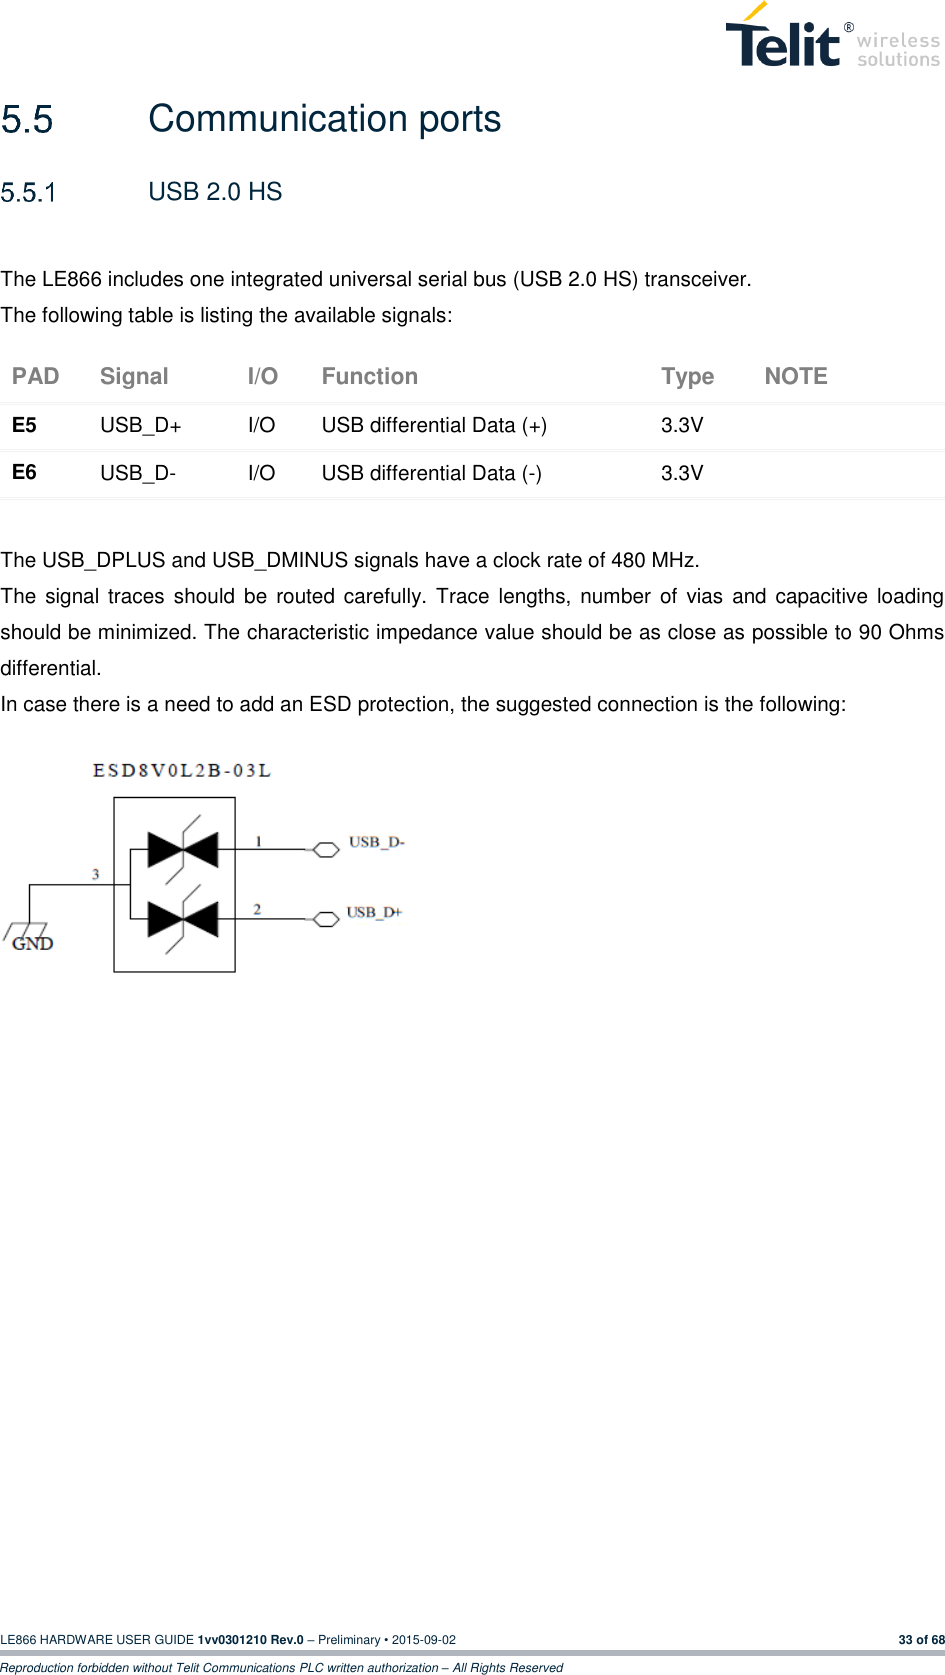  LE866 HARDWARE USER GUIDE 1vv0301210 Rev.0 – Preliminary • 2015-09-02 33 of 68 Reproduction forbidden without Telit Communications PLC written authorization – All Rights Reserved   Communication ports   USB 2.0 HS  The LE866 includes one integrated universal serial bus (USB 2.0 HS) transceiver. The following table is listing the available signals: PAD Signal I/O Function Type NOTE E5 USB_D+ I/O USB differential Data (+) 3.3V  E6 USB_D- I/O USB differential Data (-) 3.3V   The USB_DPLUS and USB_DMINUS signals have a clock rate of 480 MHz.  The  signal traces  should  be  routed  carefully.  Trace  lengths,  number of vias  and capacitive loading should be minimized. The characteristic impedance value should be as close as possible to 90 Ohms differential.  In case there is a need to add an ESD protection, the suggested connection is the following:                  